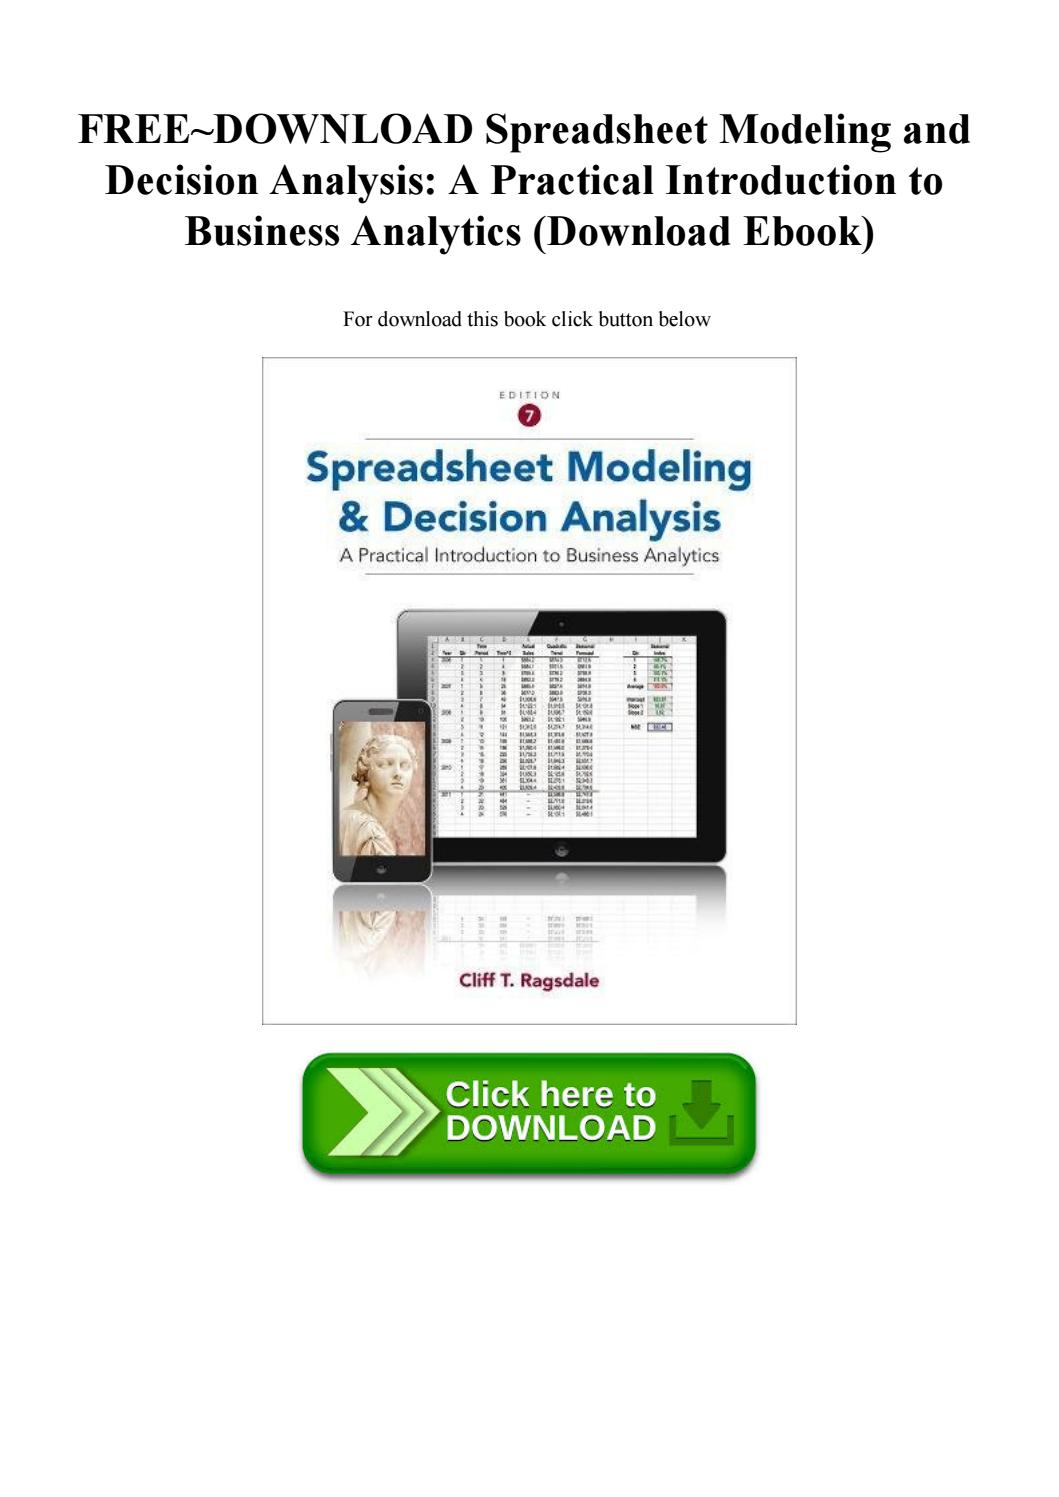 Spreadsheet Modeling For Business Decisions 3Rd Edition pertaining to Spreadsheet Modeling For Business Decisions Ebook 3Rd Edition Pdf